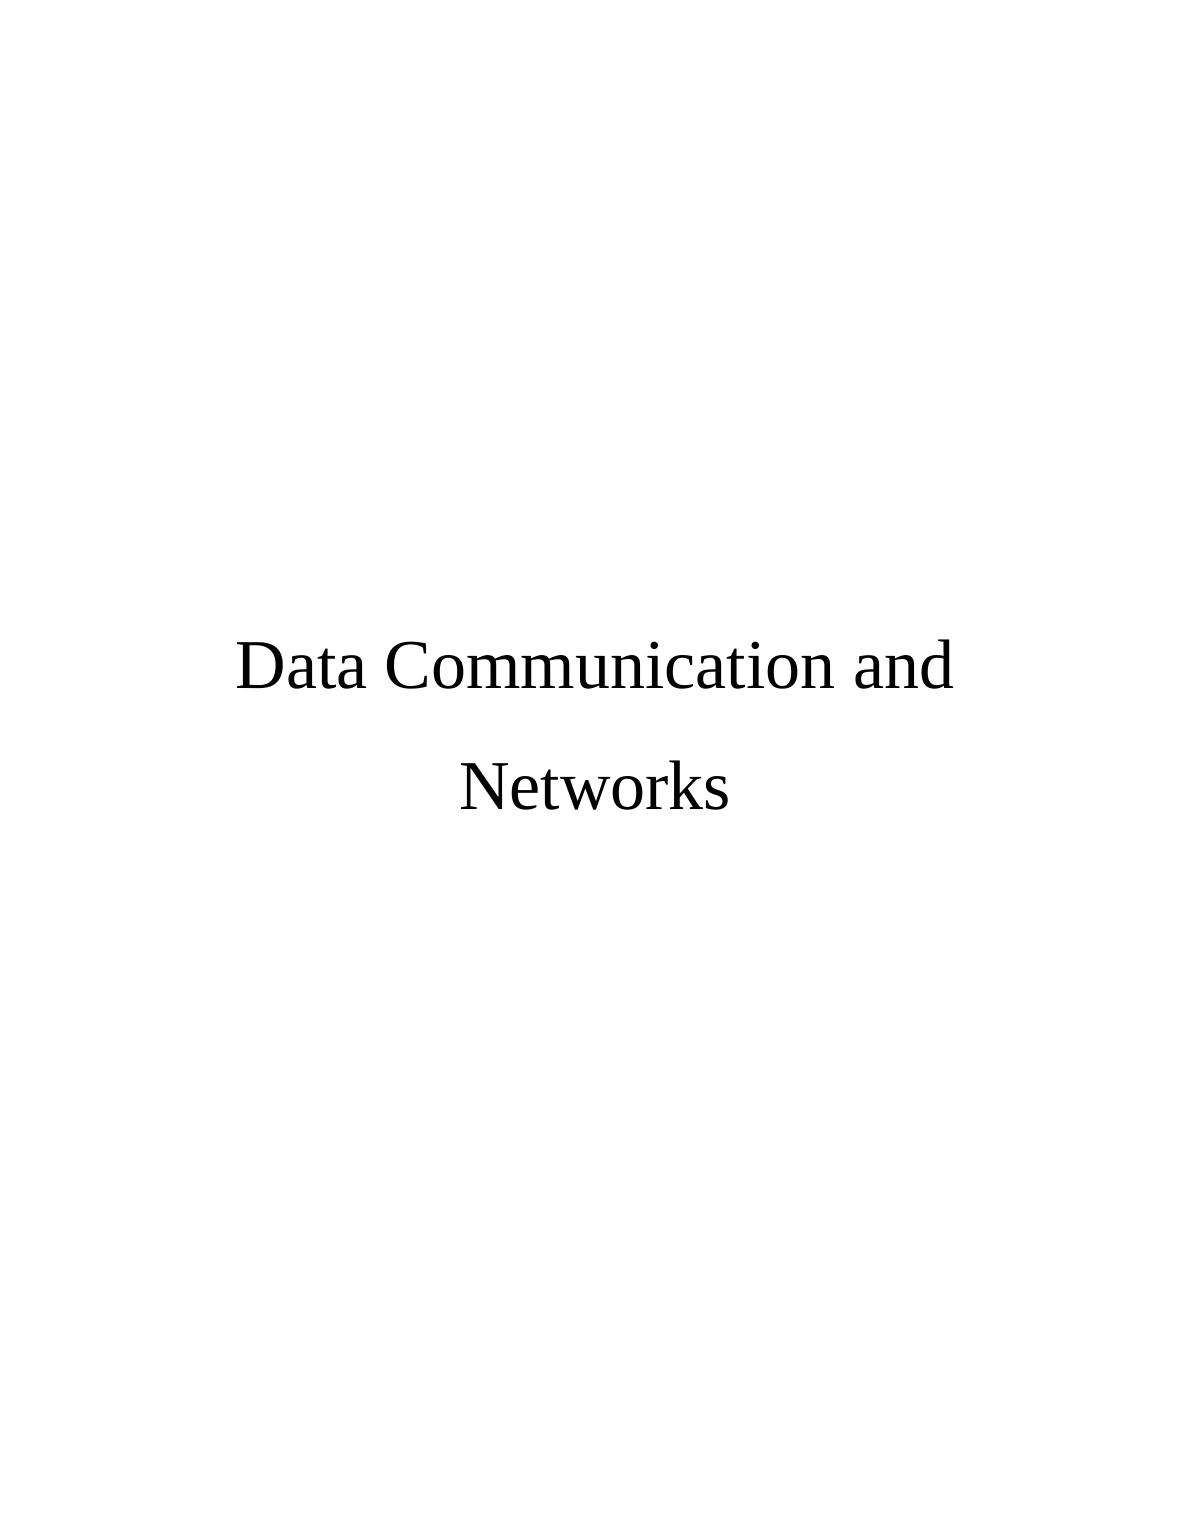 Data Communication and Networks Assignment (Solved)_1